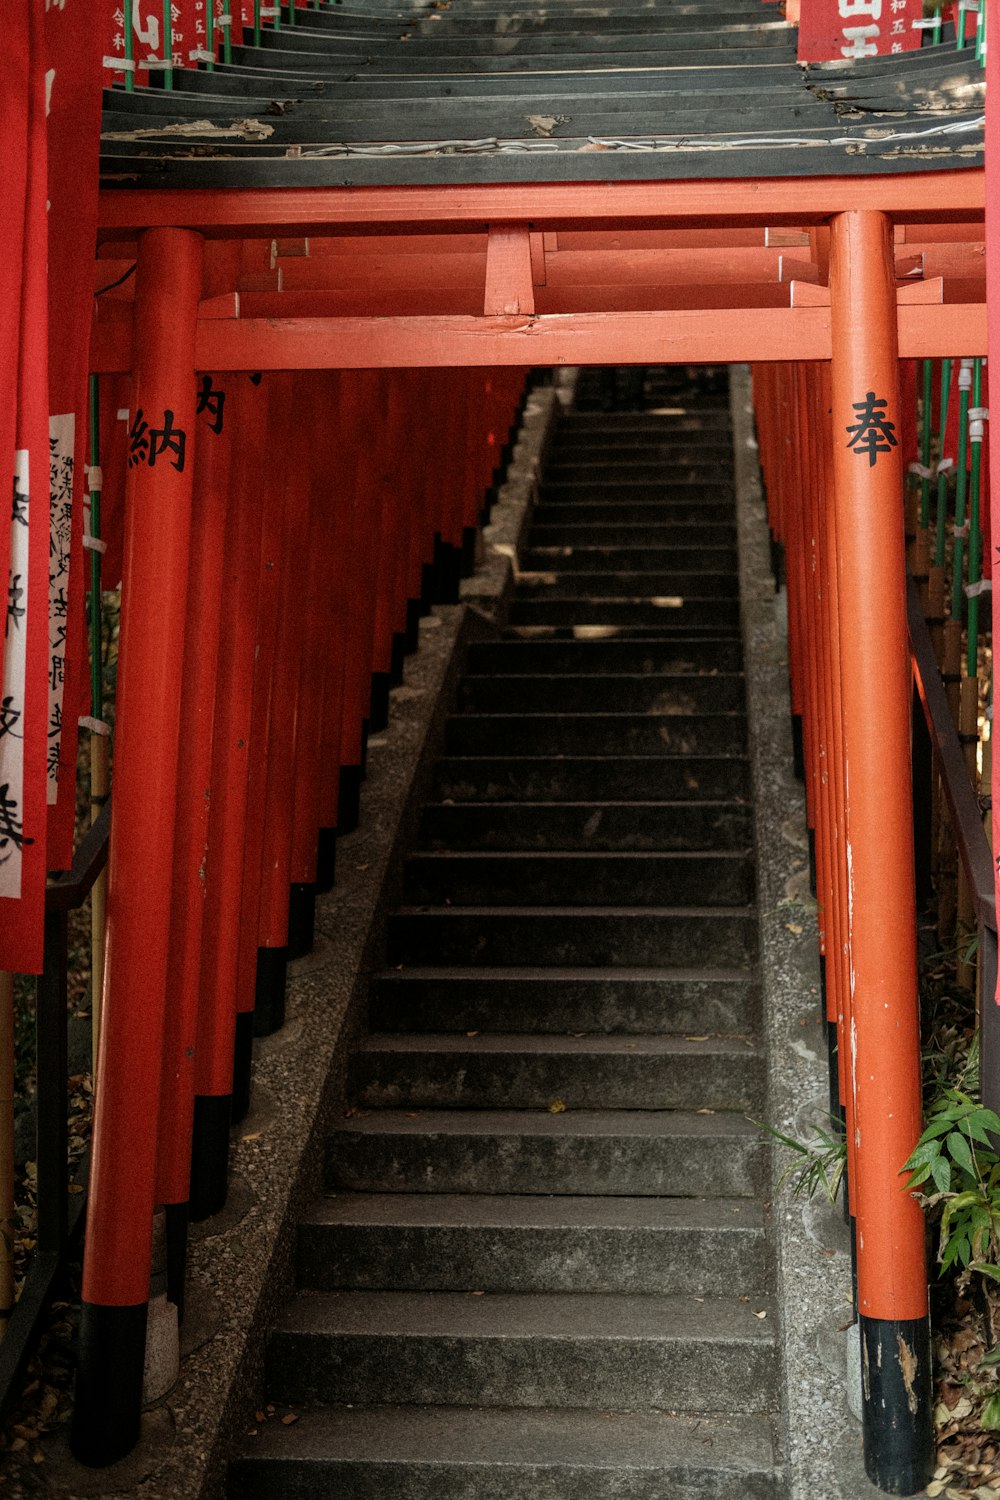 a staircase leading up to a red building